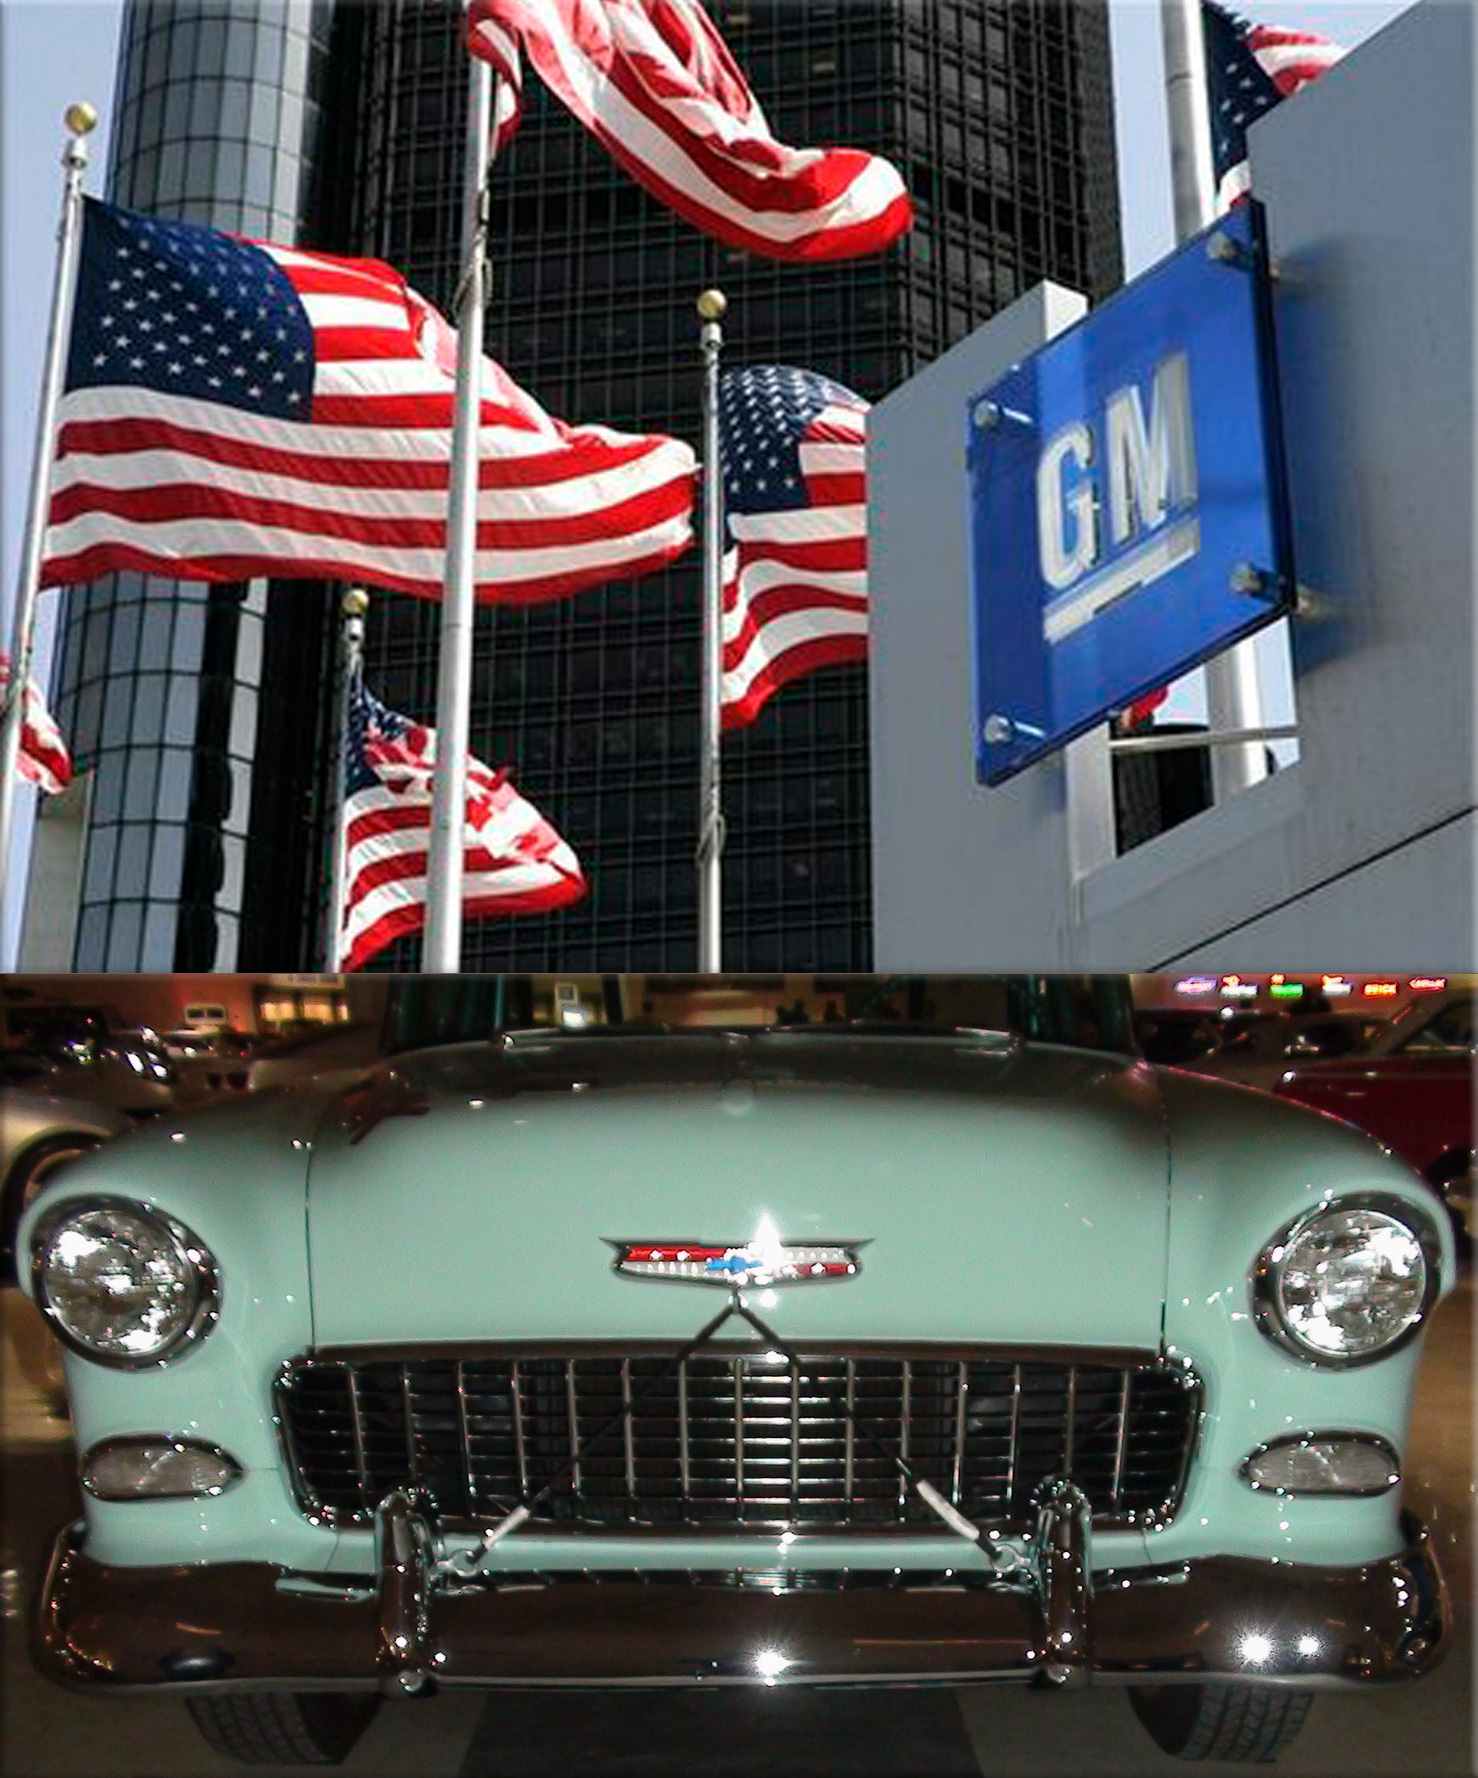 General Motors Corporation becomes the first U.S. corporation to make over US$1 billion in a year (General Motors Headquarters, credit AP; GM Heritage Center - 067 - Cars - 1955 Chevrolet, credit Tino Rossini, Flickr)